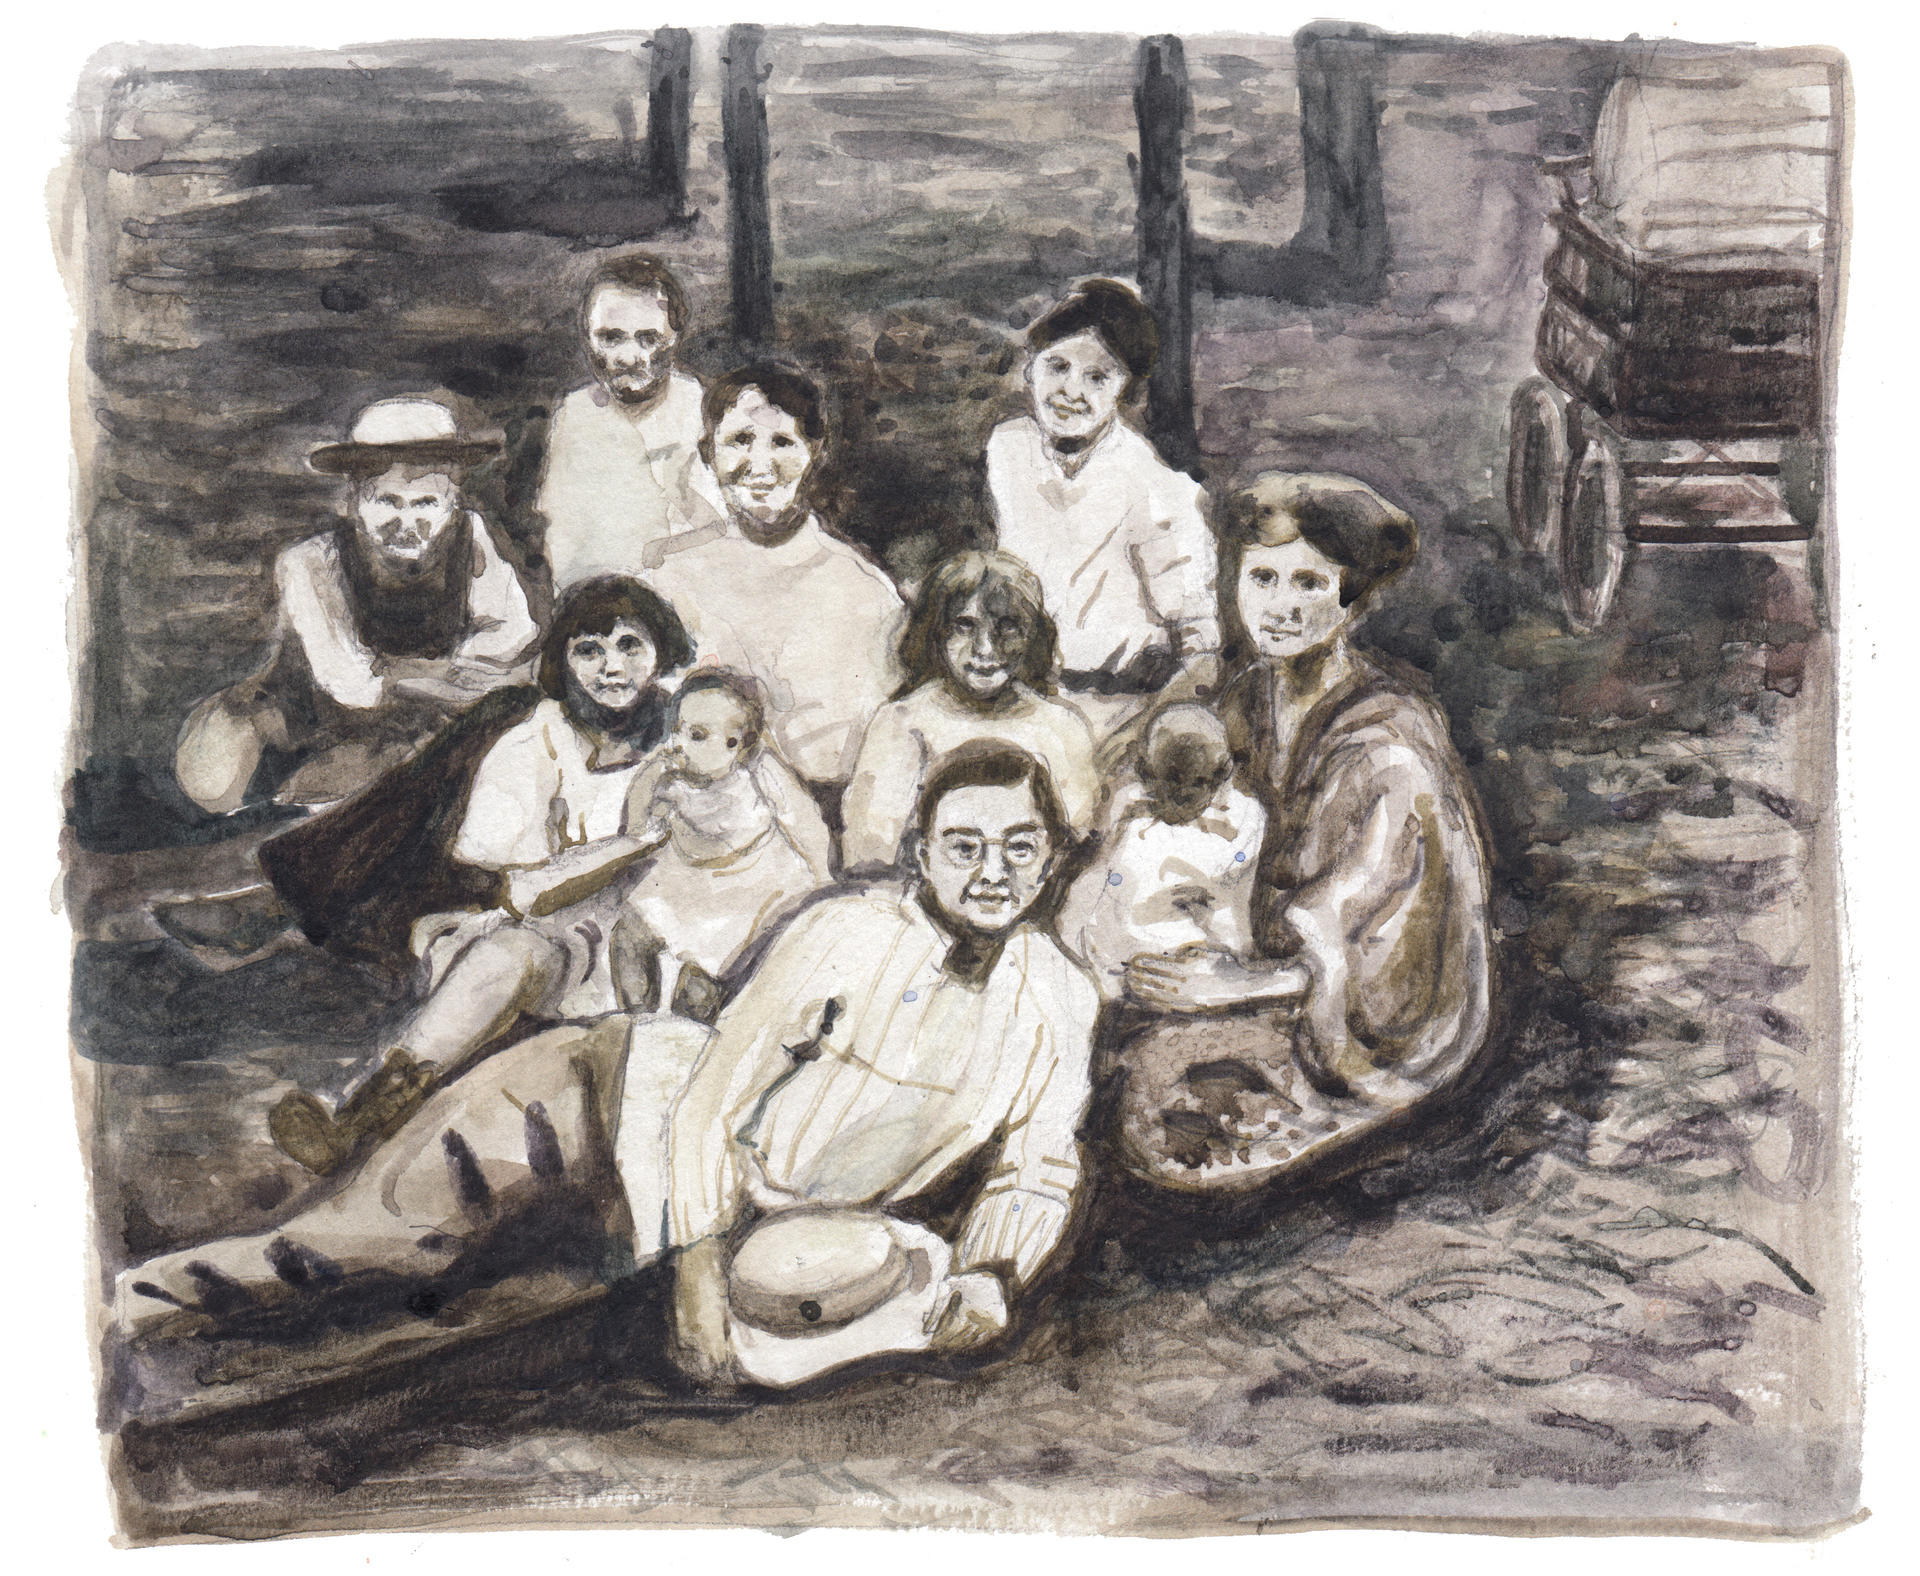 A painting of a family photograph of the Cohen family in 1909